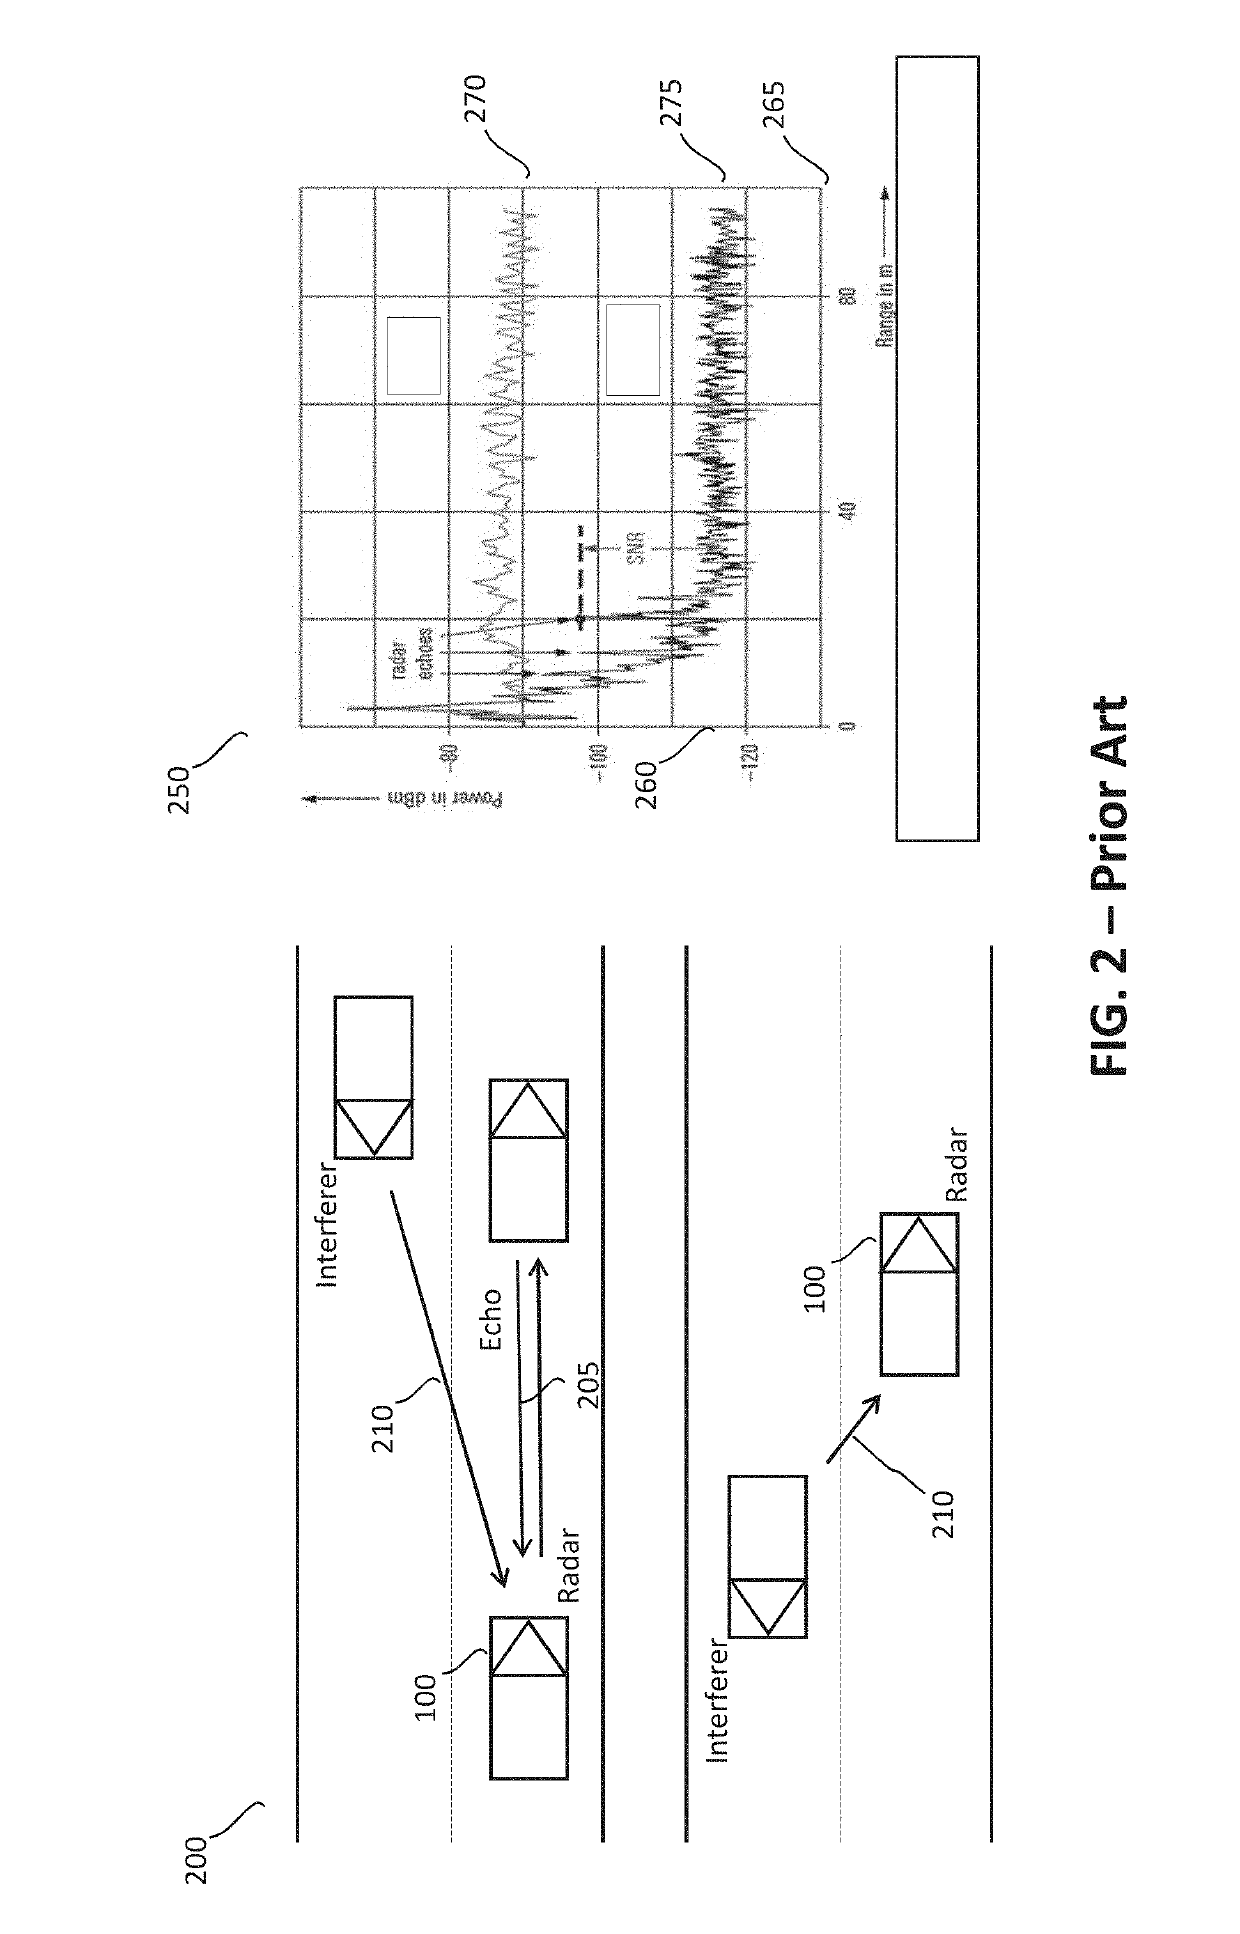 Radar Unit, Integrated Circuit and Methods for Detecting and Mitigating Mutual Interference